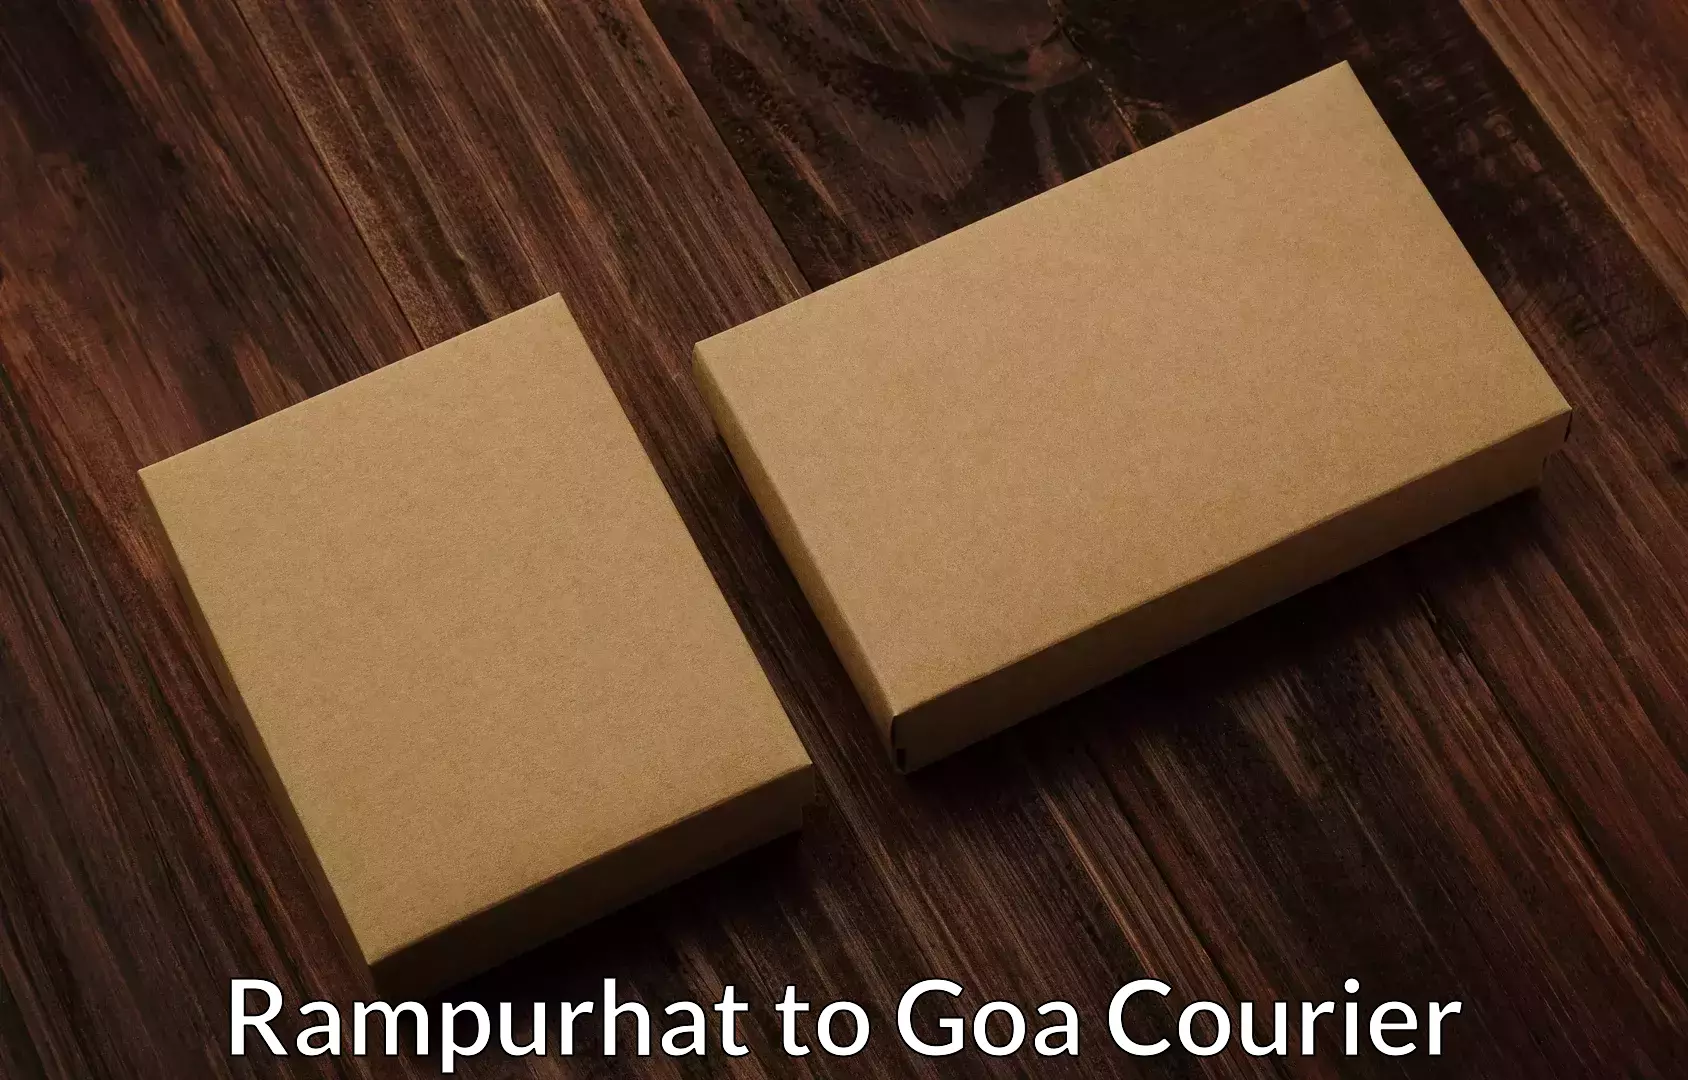 Moving and packing experts Rampurhat to Goa